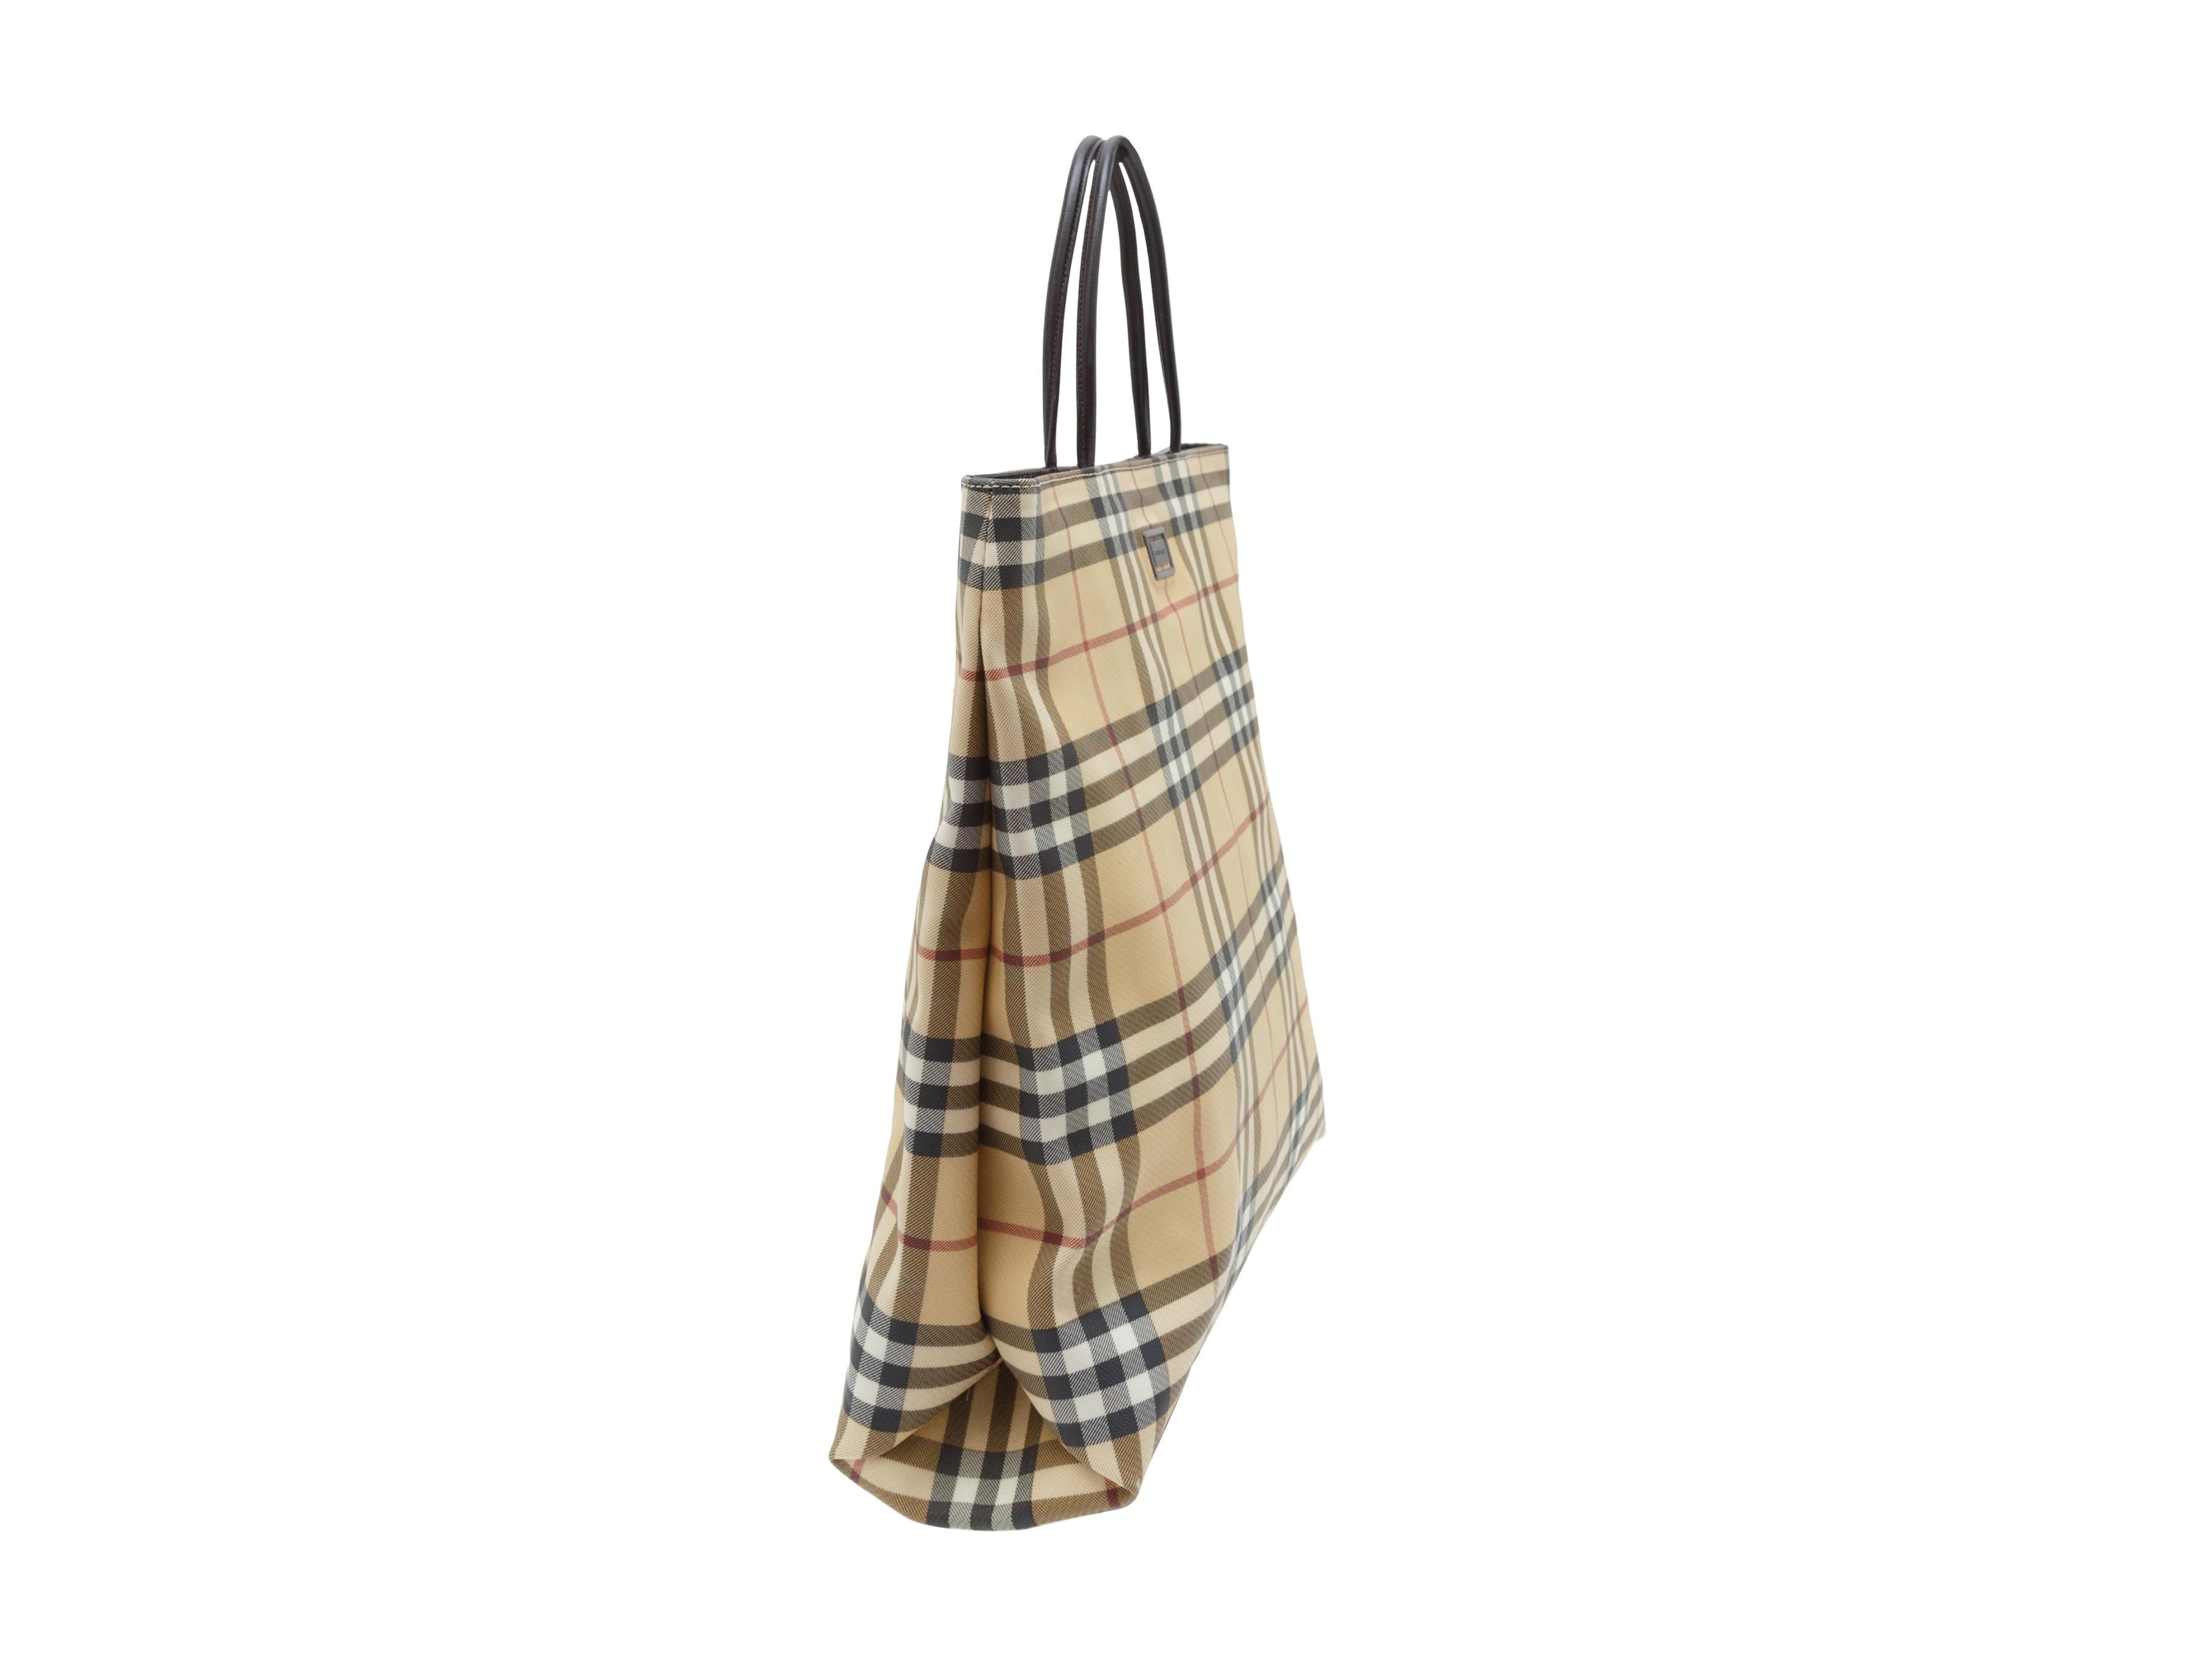 Product details: Beige Burberry Nova Check Tote Bag. The Burberry tote bag has a coated canvas body, leather handles, and it's lined inside. The bag has a magnetic snap closure. 13